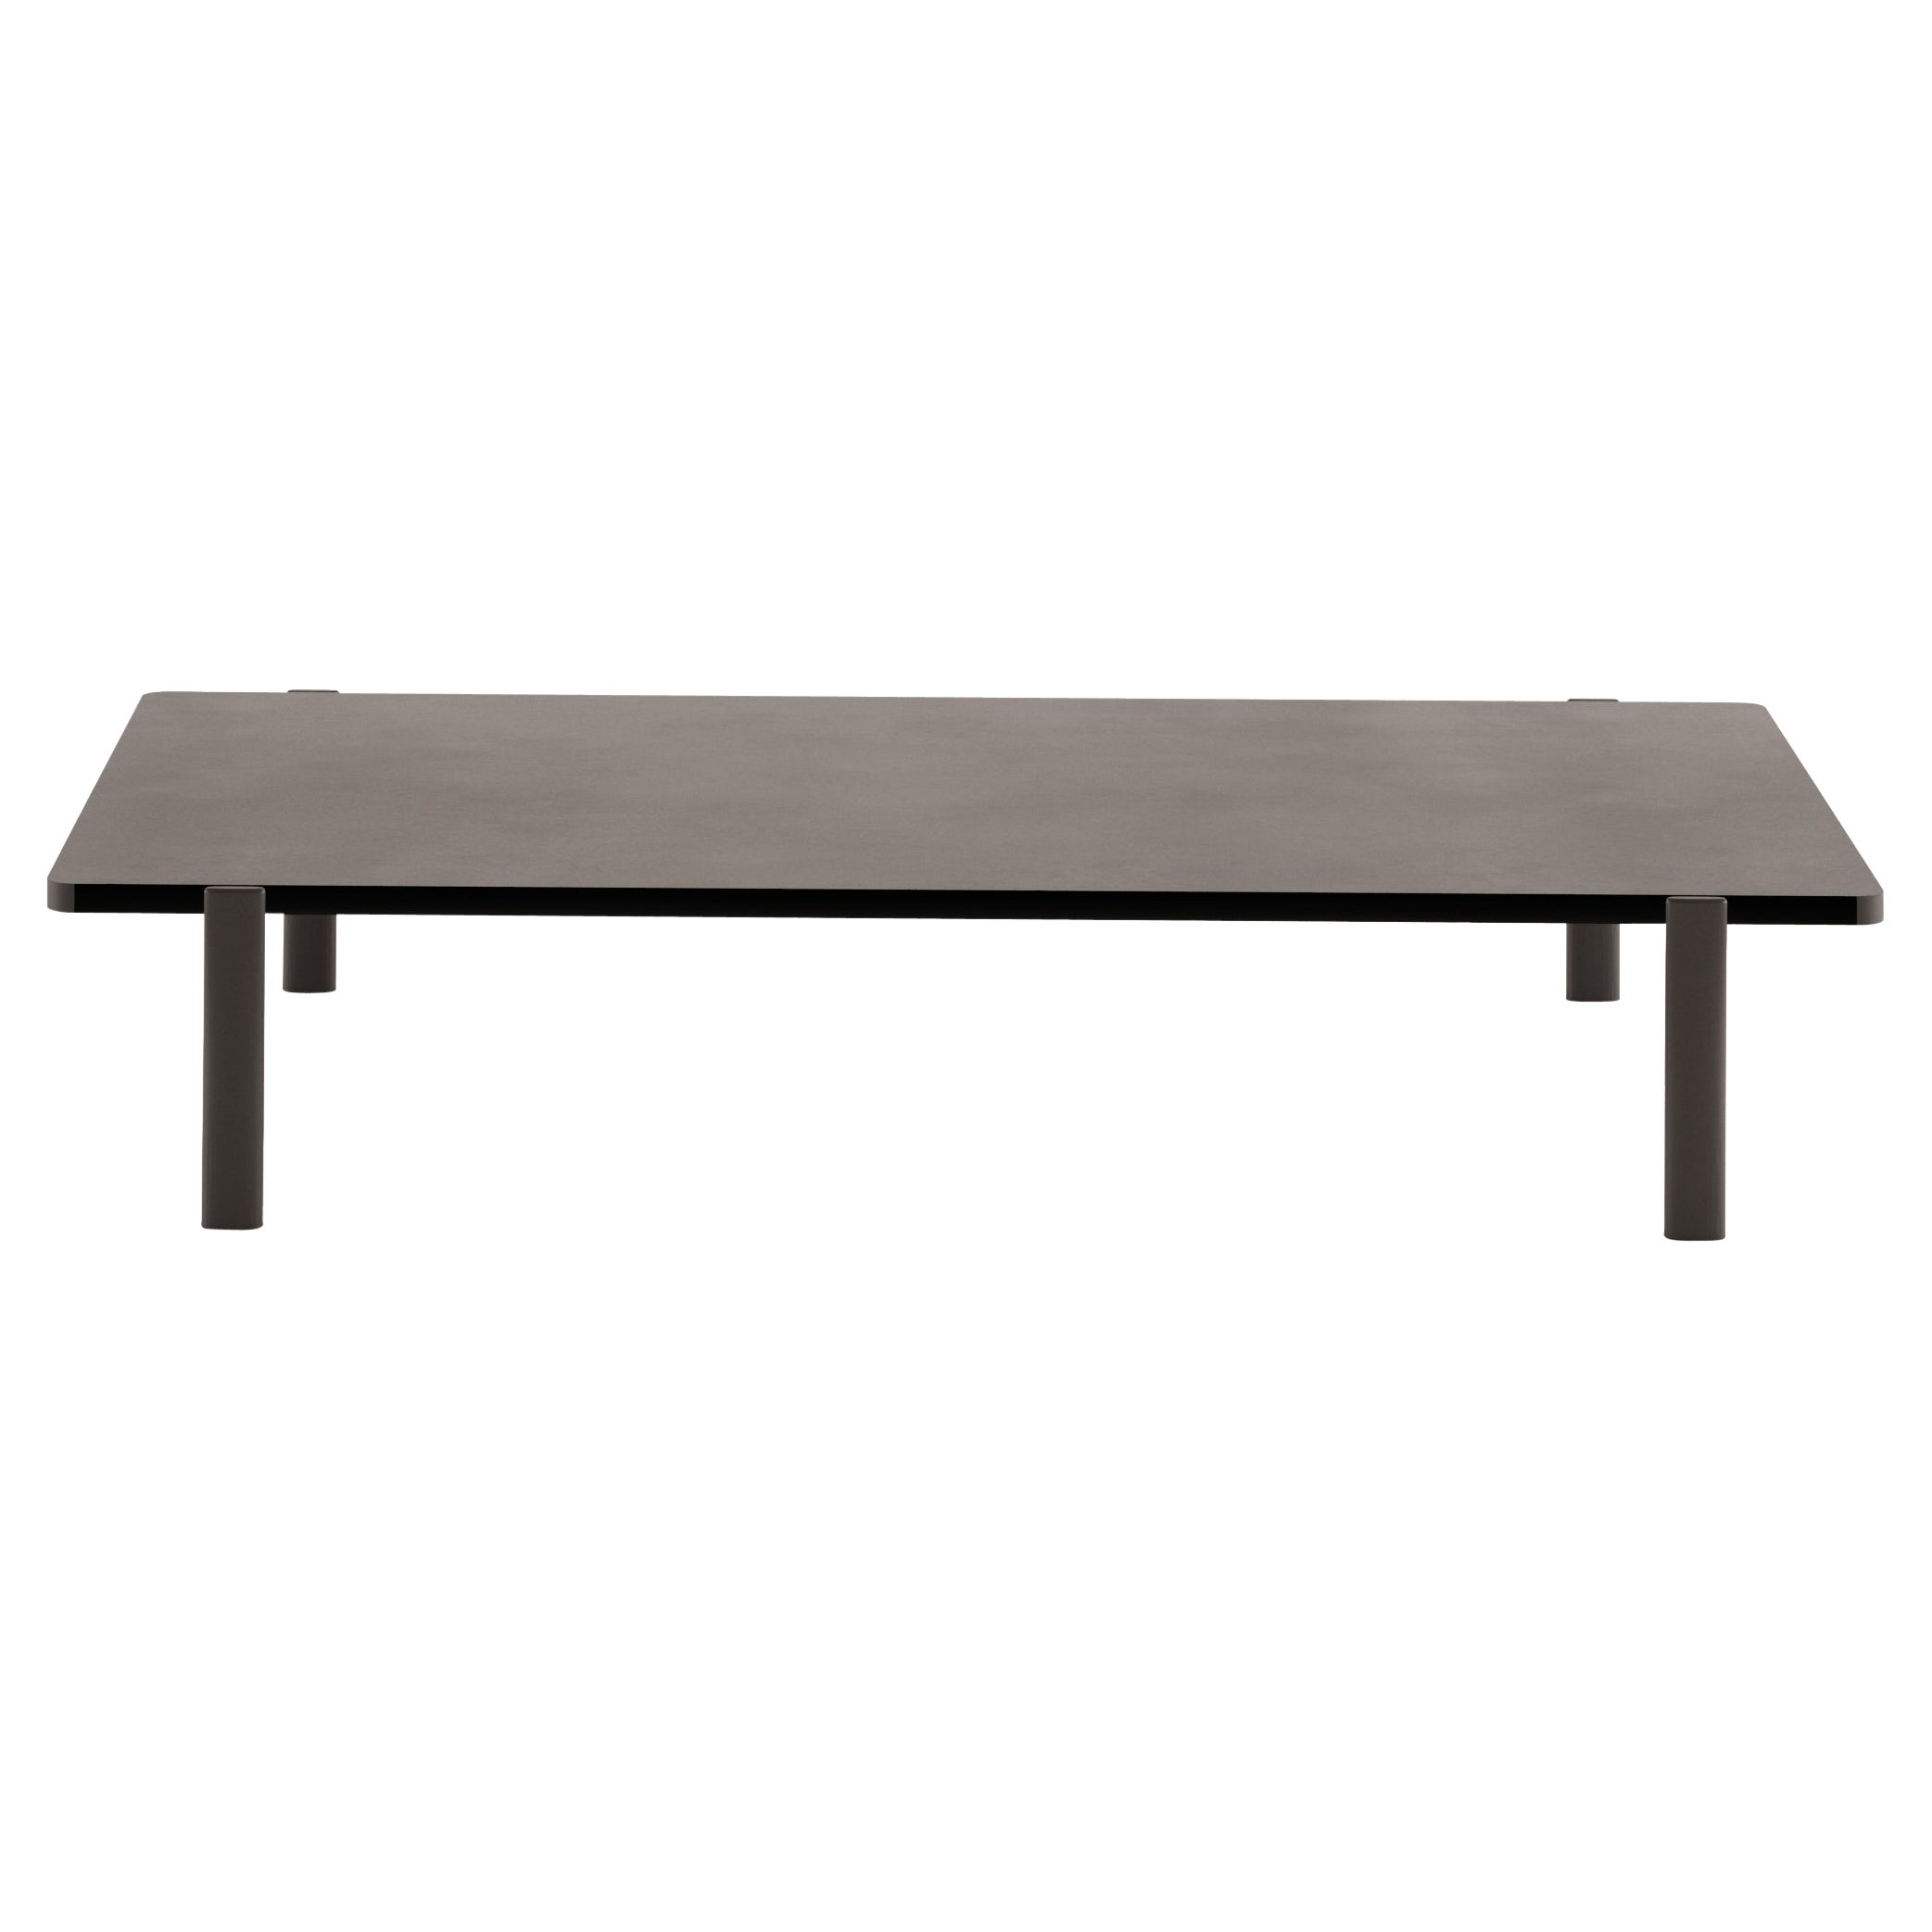 Alias 955 Eleven Low Table Singular Rectangle w Grey Color MDF & Lacquered Frame For Sale